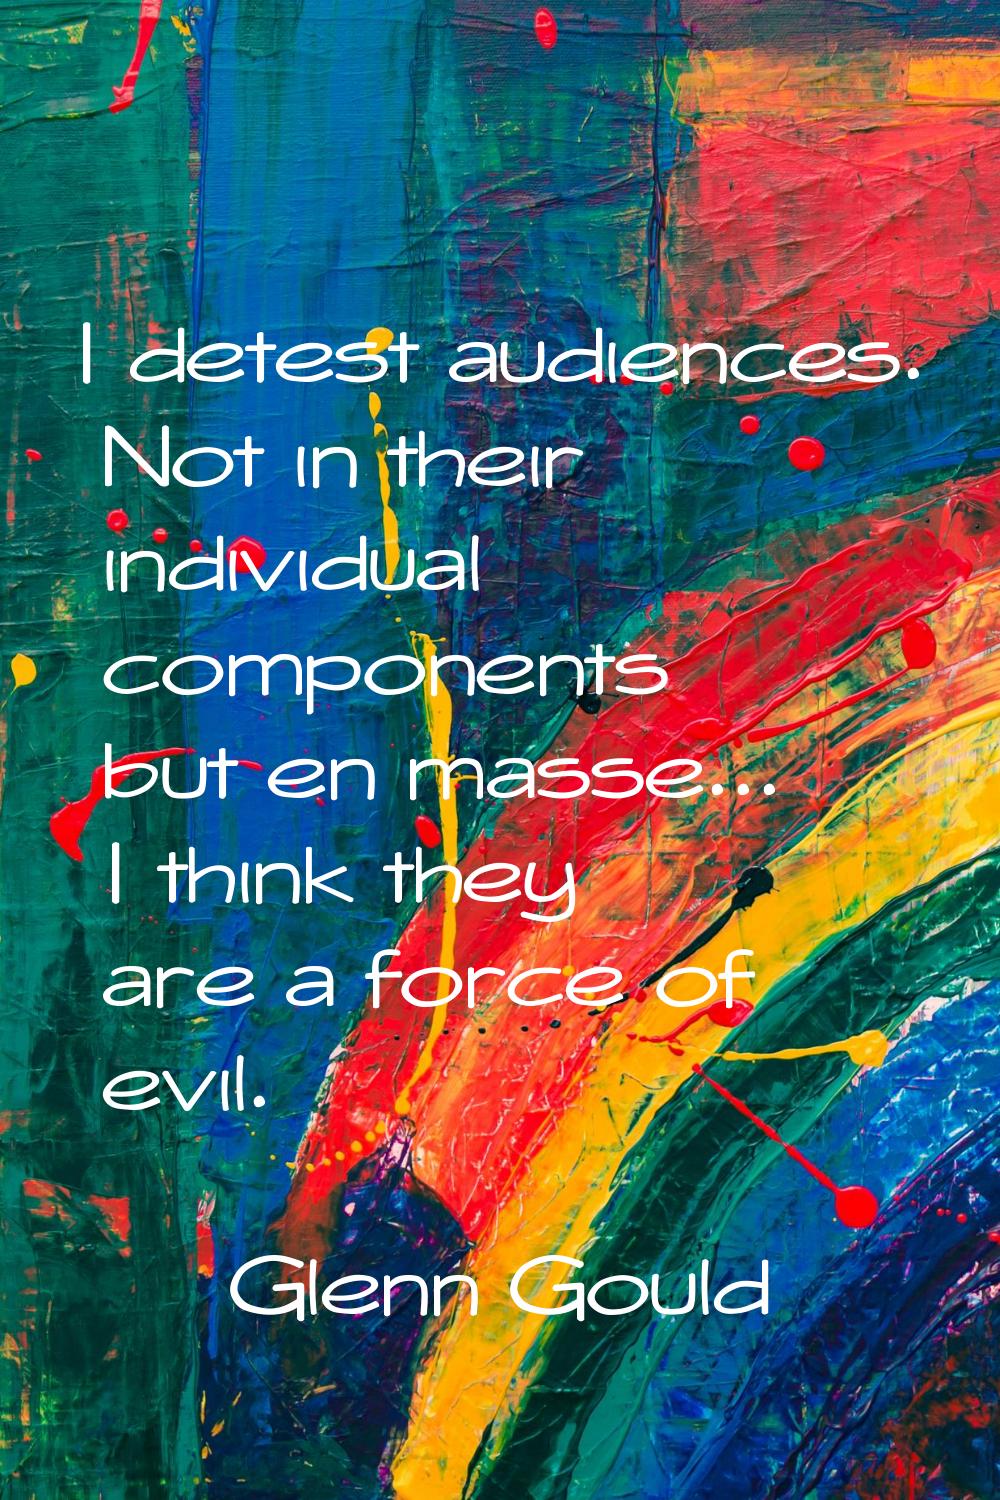 I detest audiences. Not in their individual components but en masse... I think they are a force of 